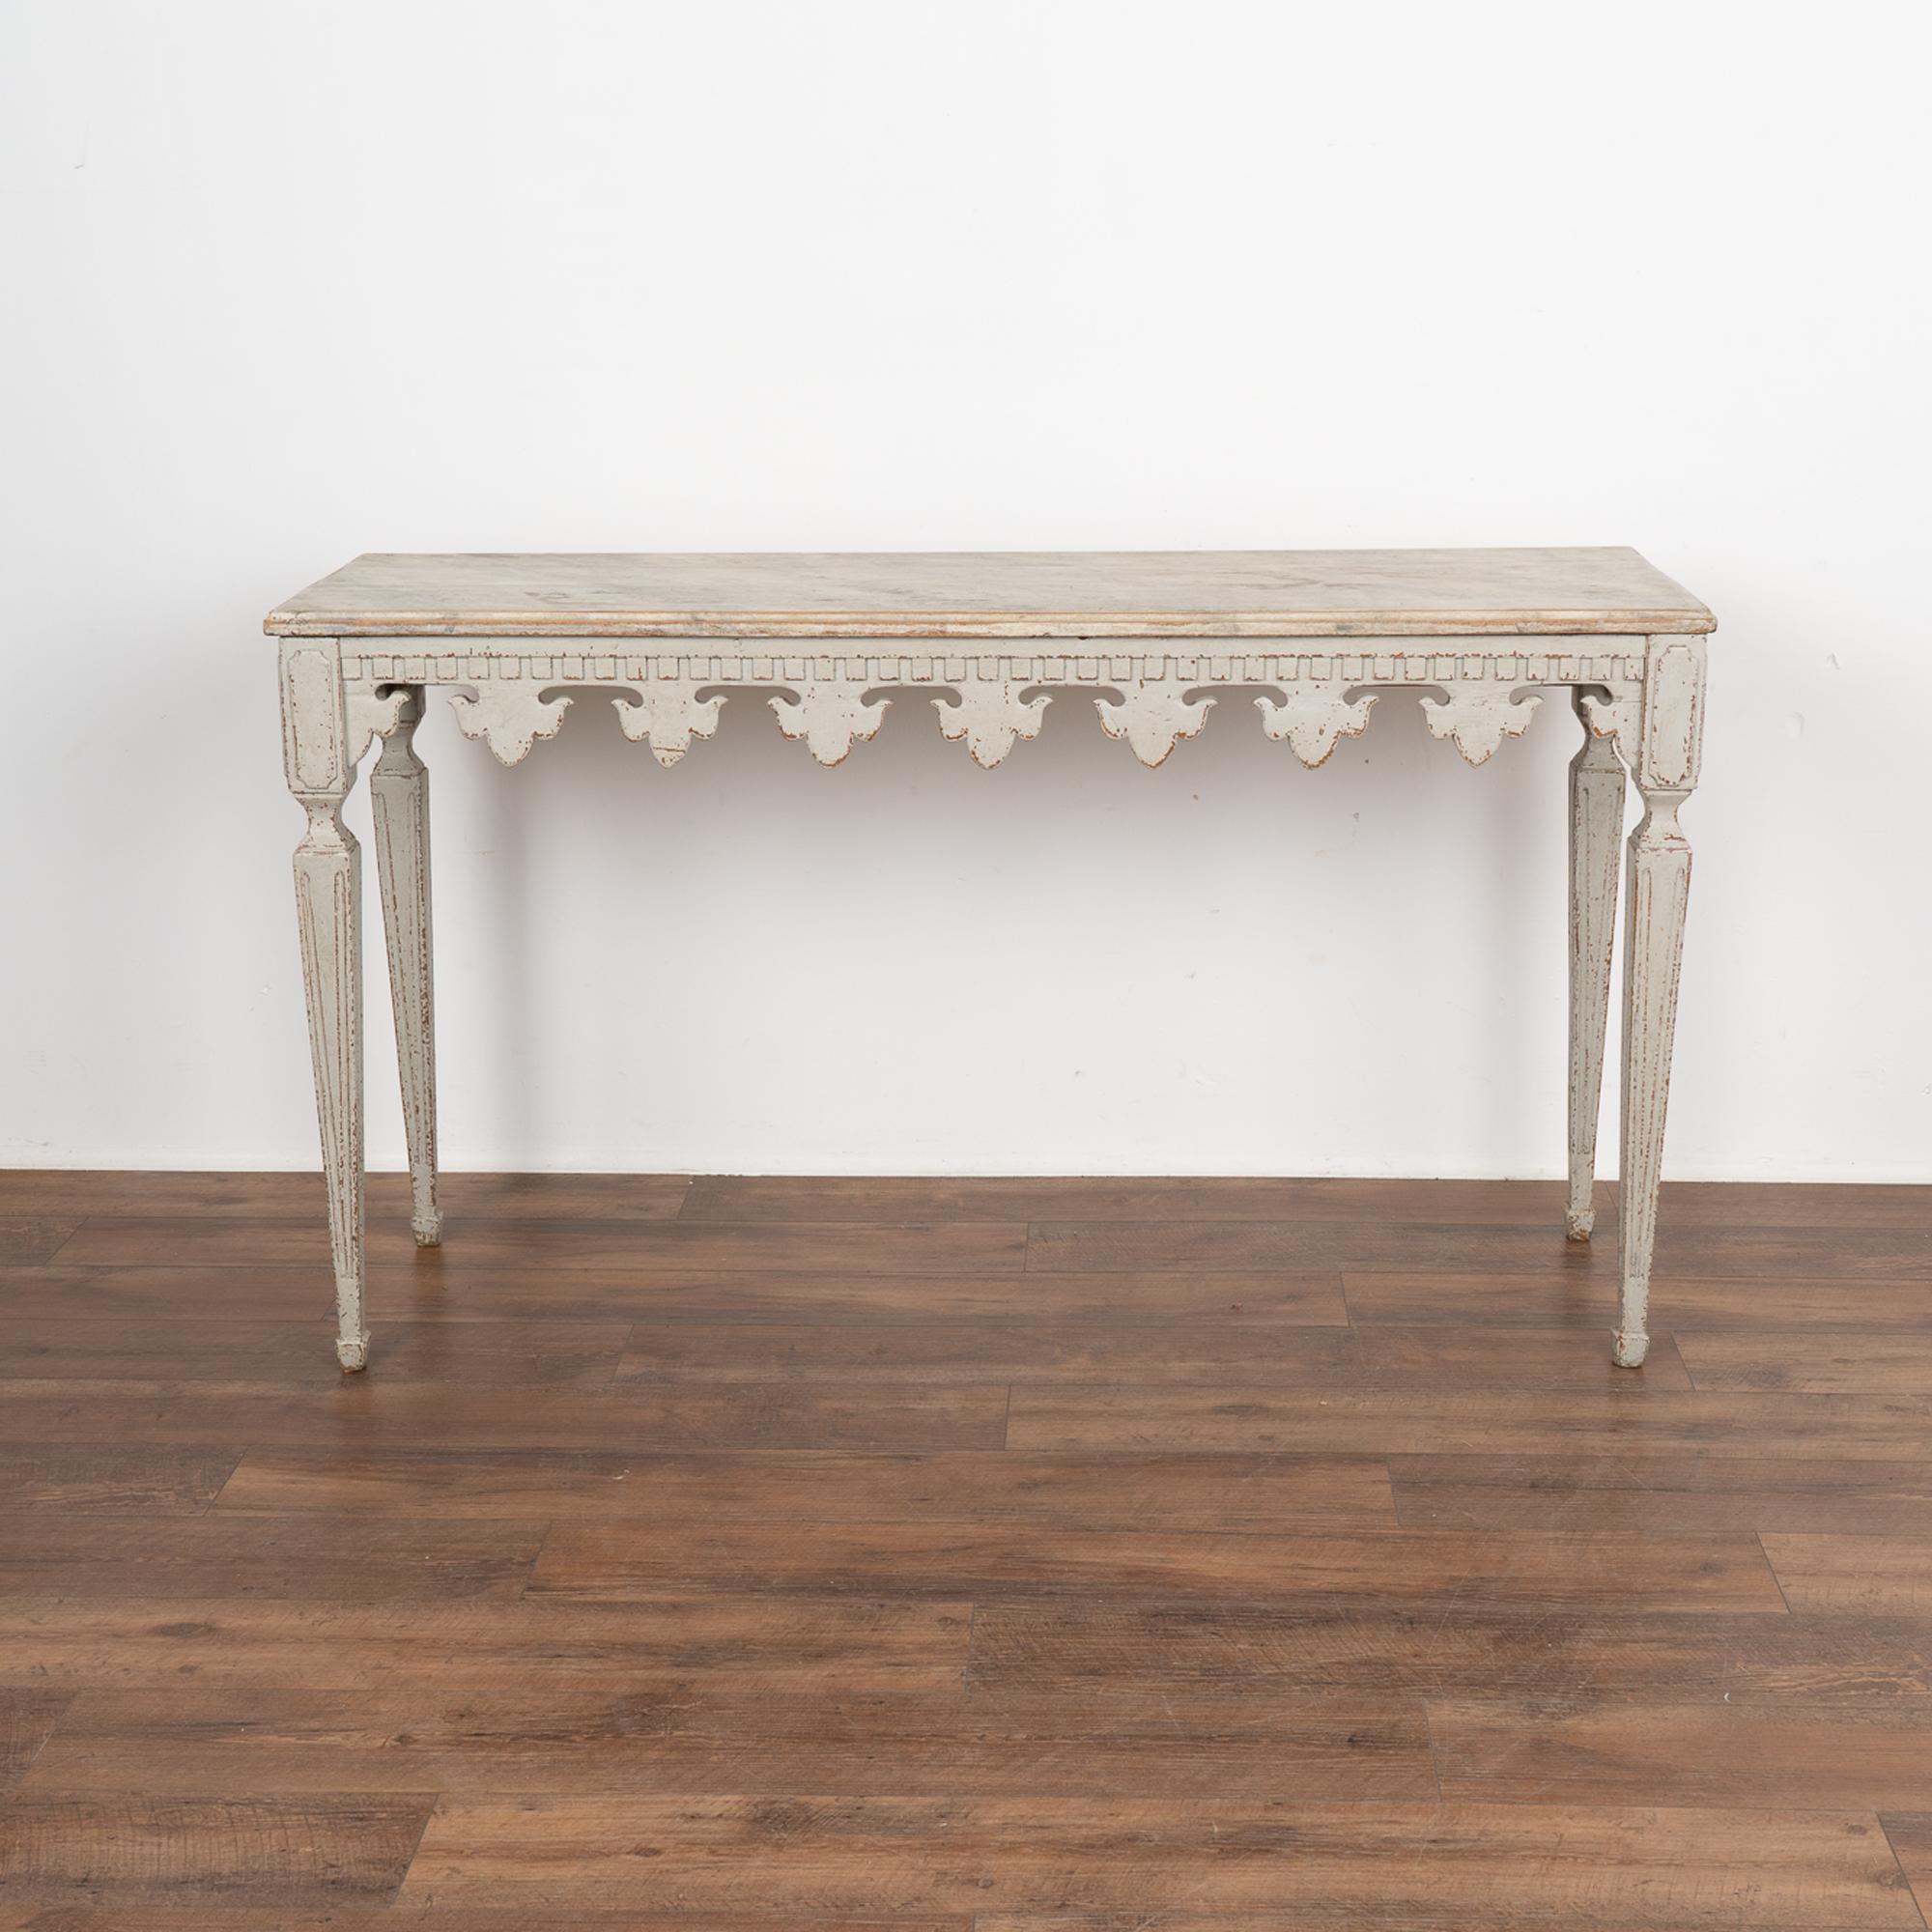 Gustavian Gray Painted Console Table With Carved Fleur De Lis Skirt, Sweden circa 1880